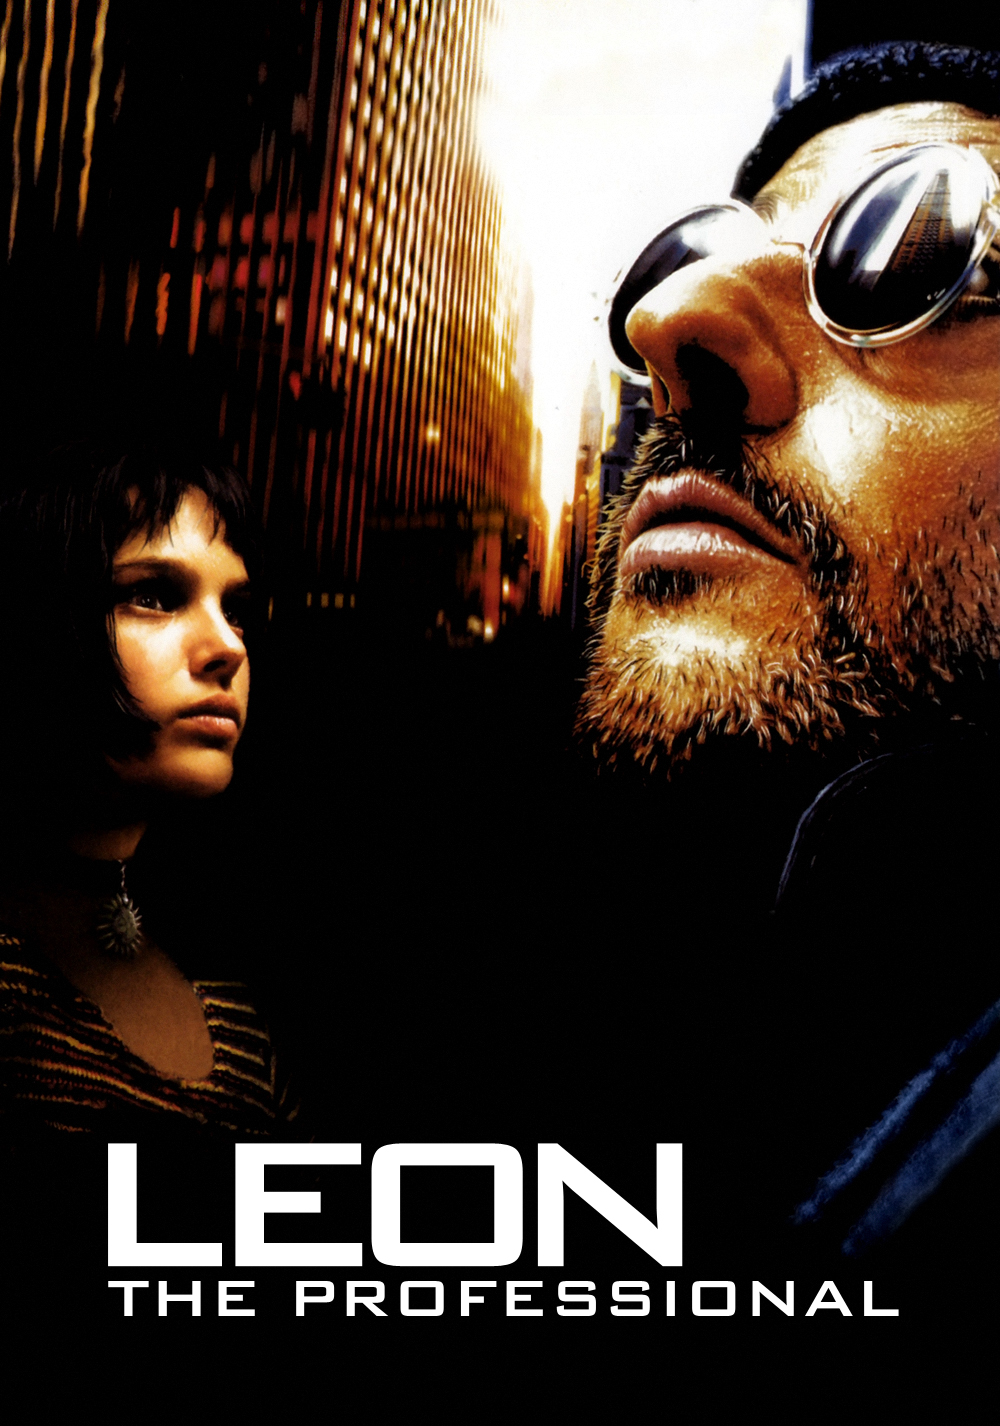 Leon The Professional Hd Movie Download - Leon The Professional 1994 Poster , HD Wallpaper & Backgrounds